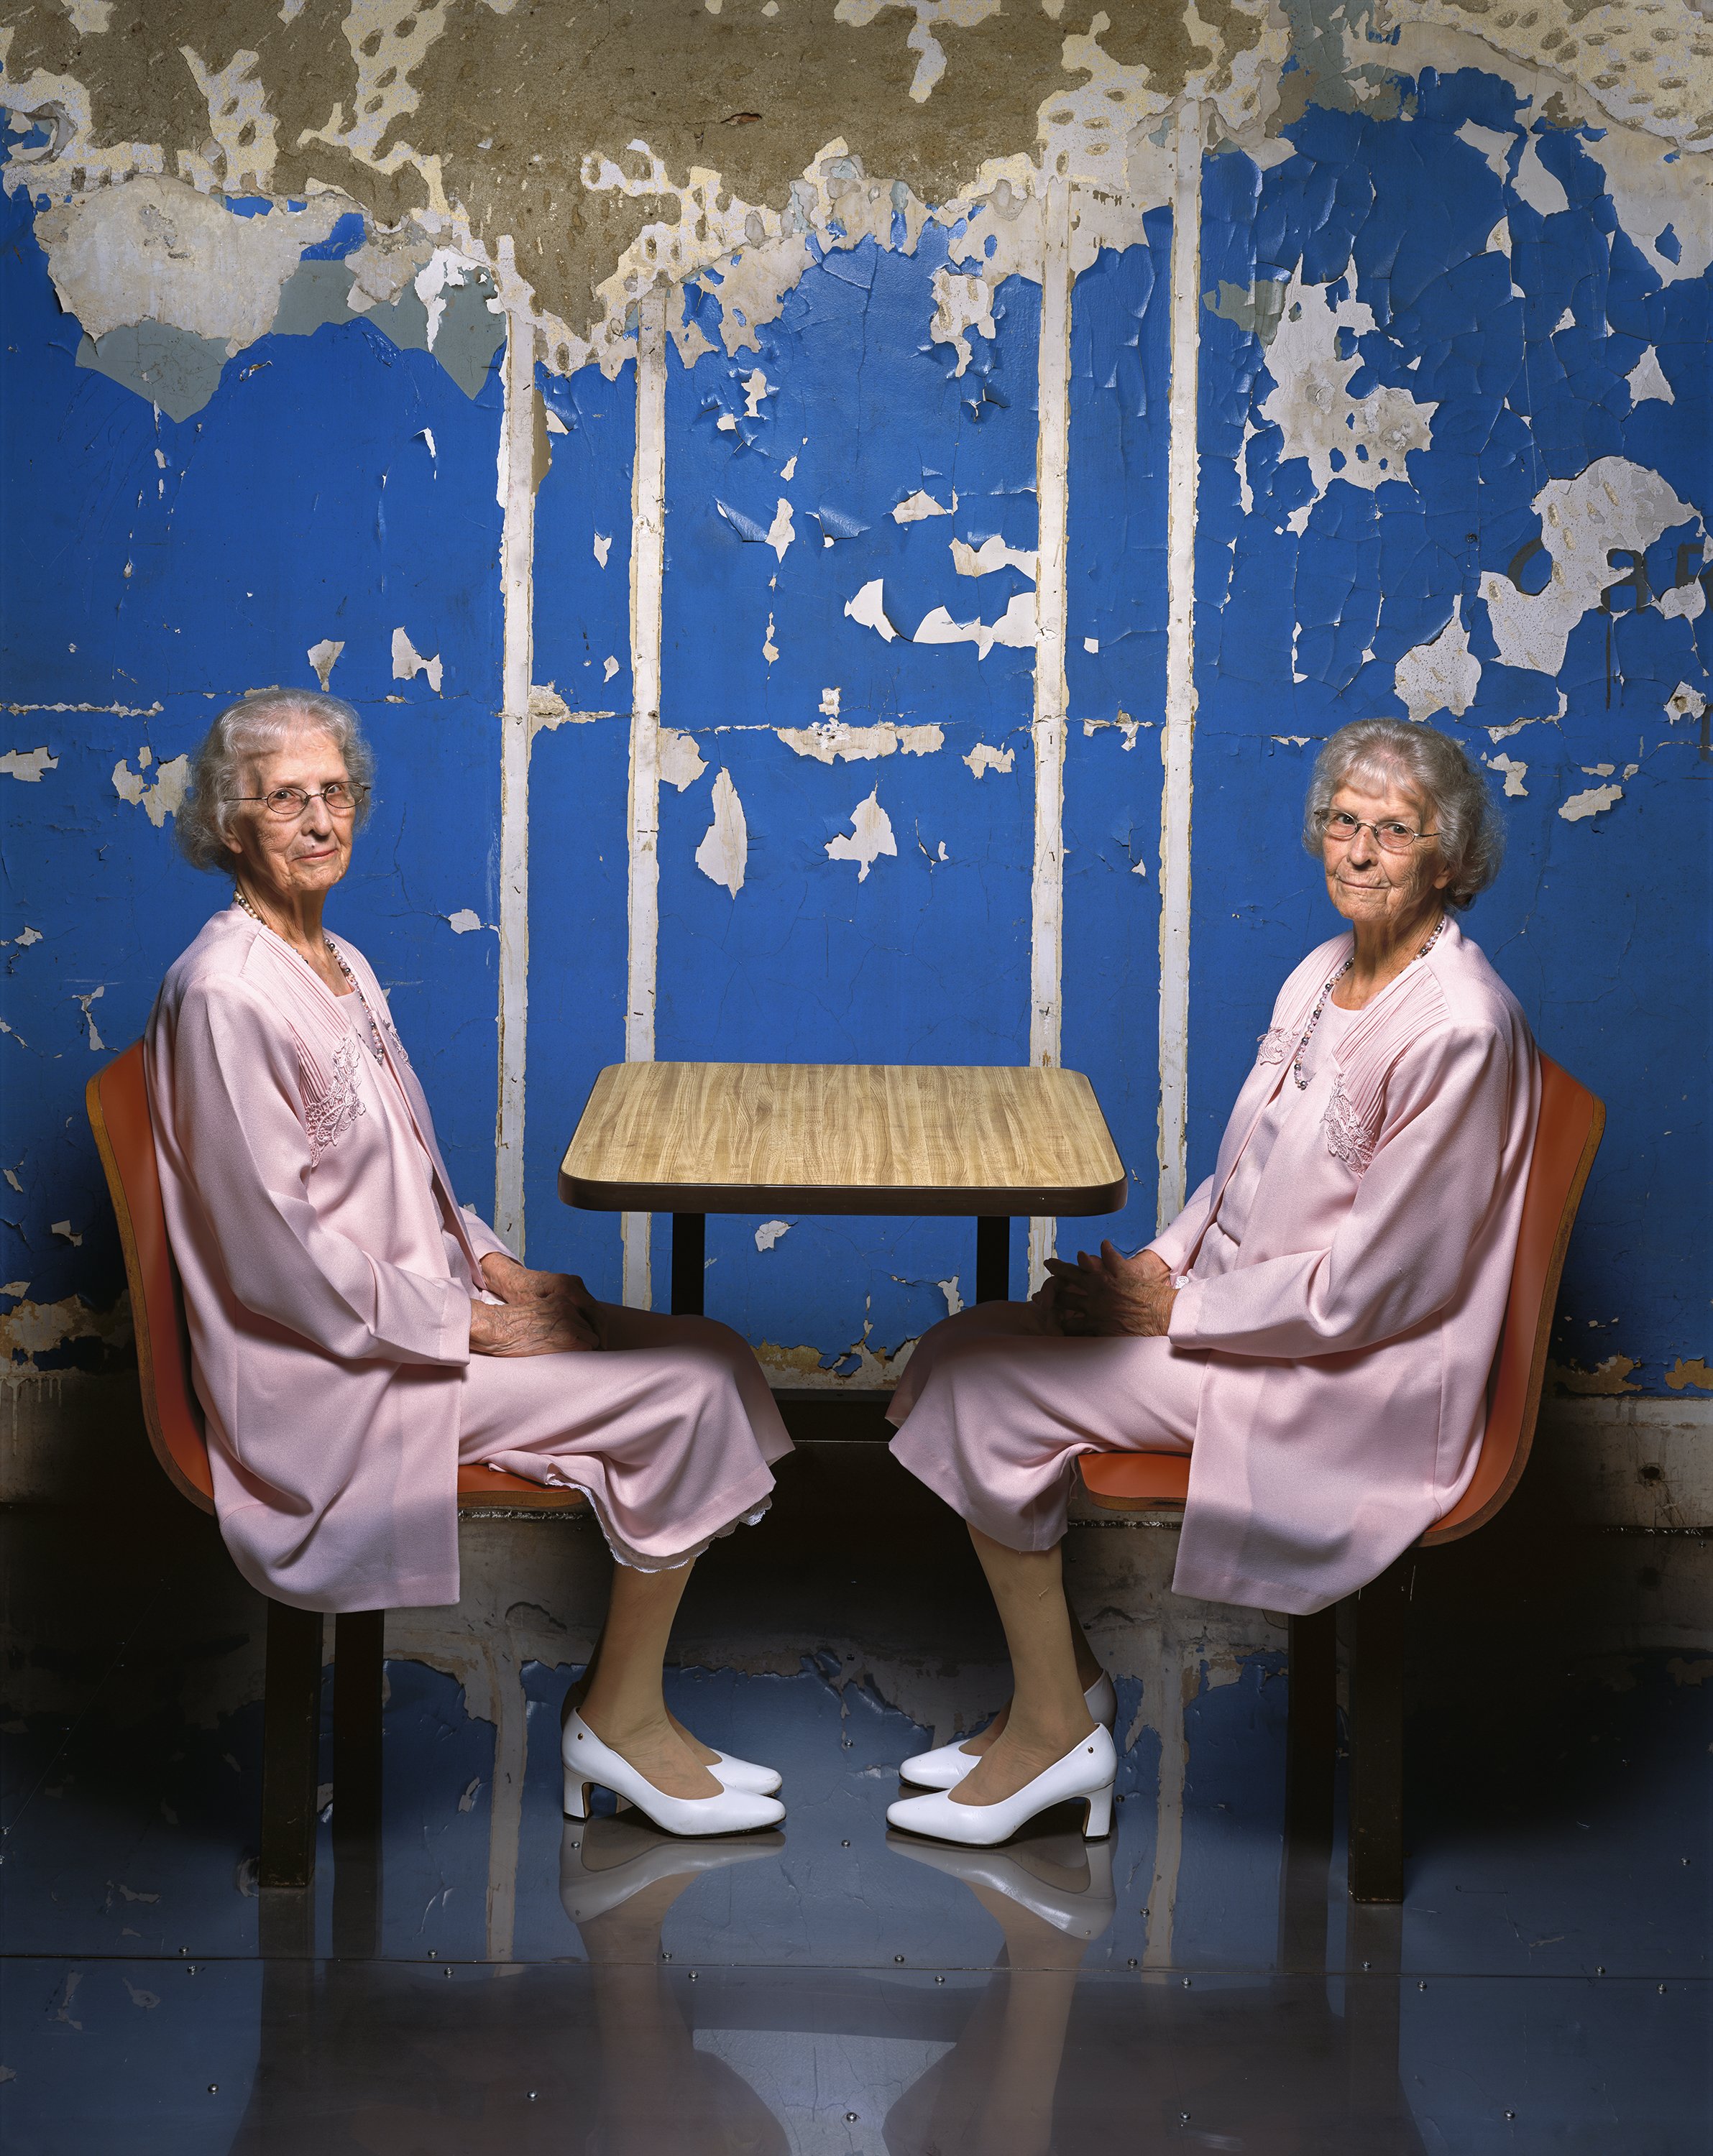 Mildred and Mary, Wilson, NC, 2011